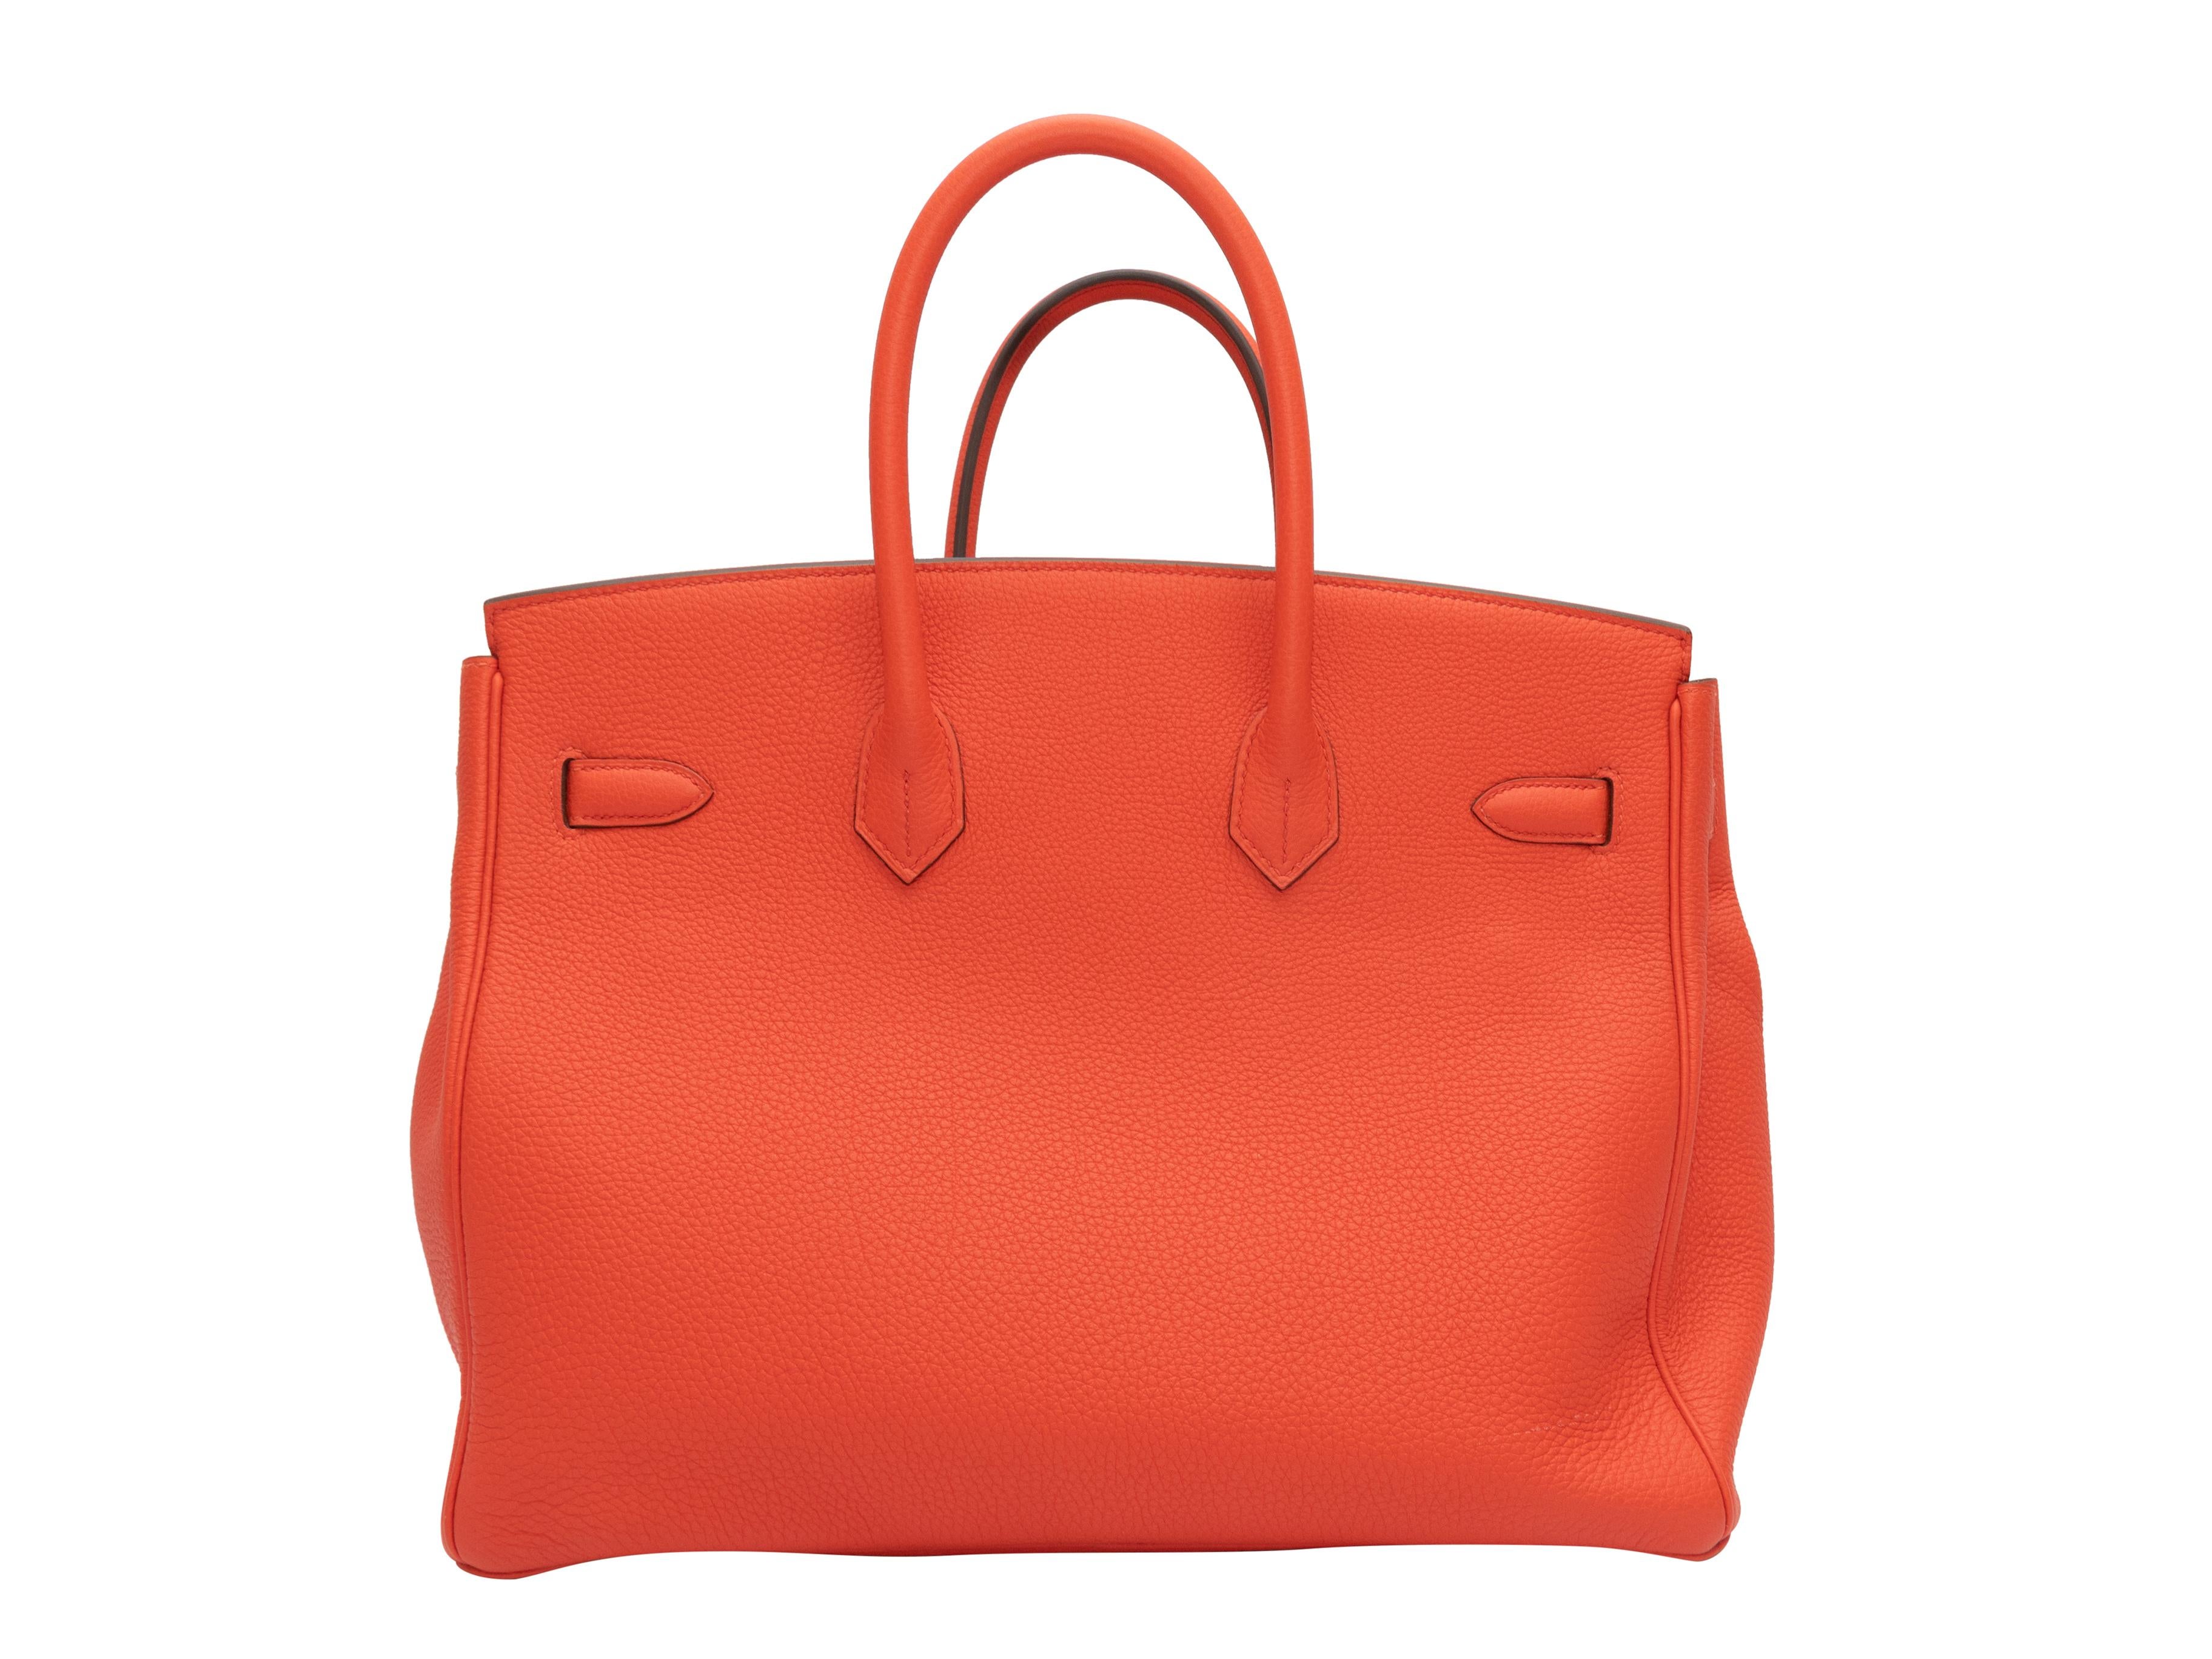 Hermes Capucine Togo 35 Birkin Bag In Good Condition For Sale In New York, NY